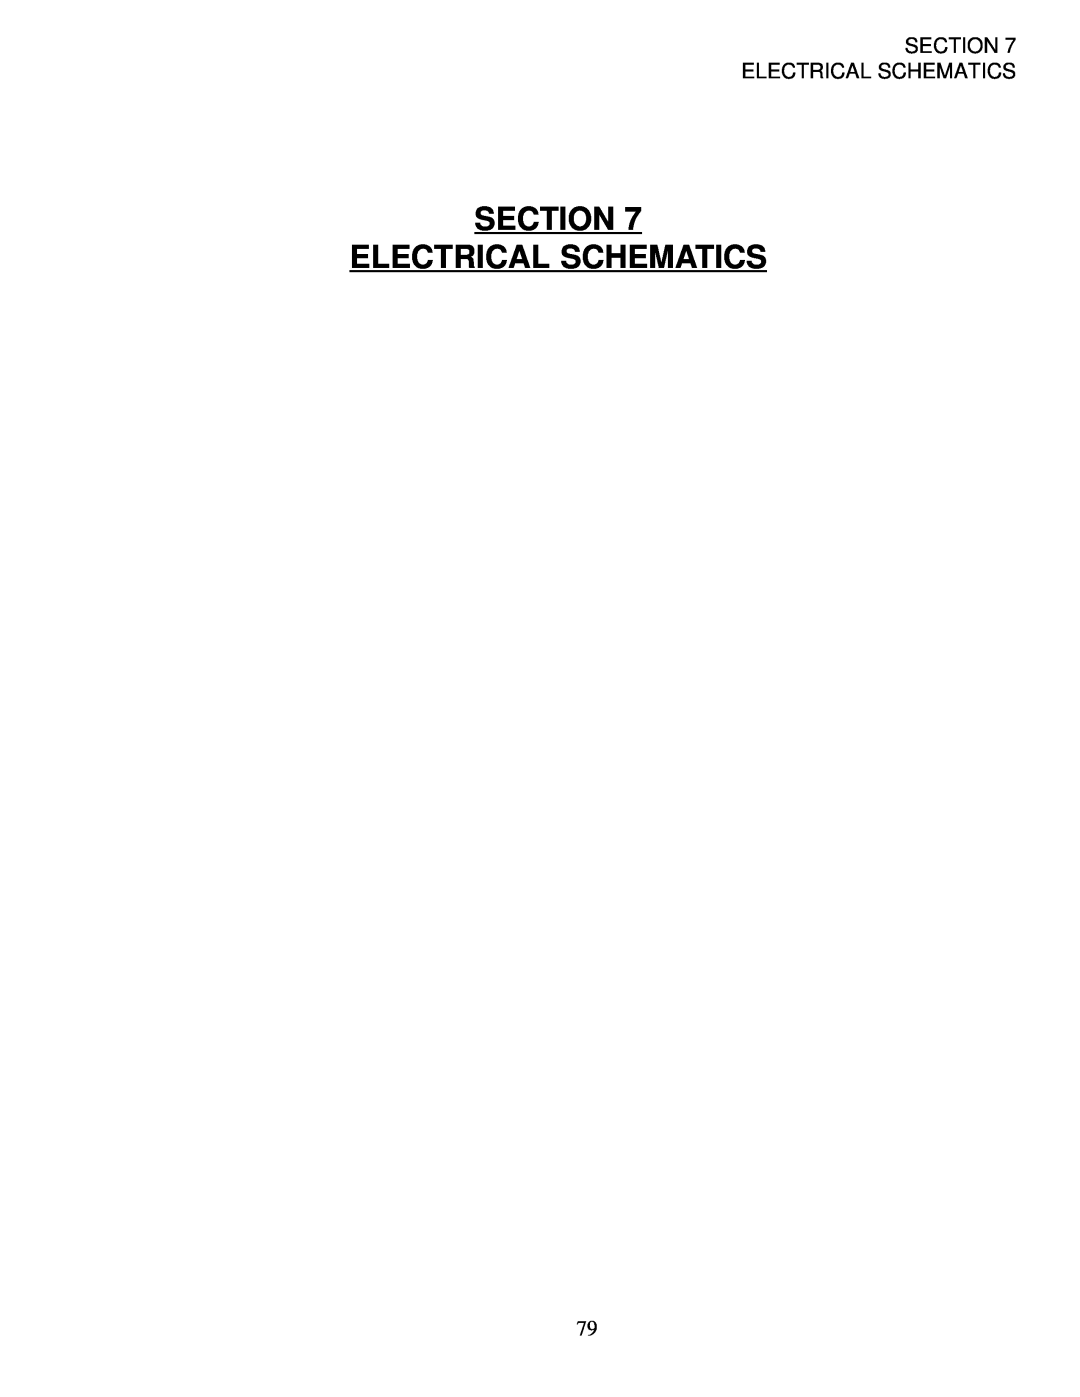 Middleby Marshall PS200-R68 installation manual Section Electrical Schematics 